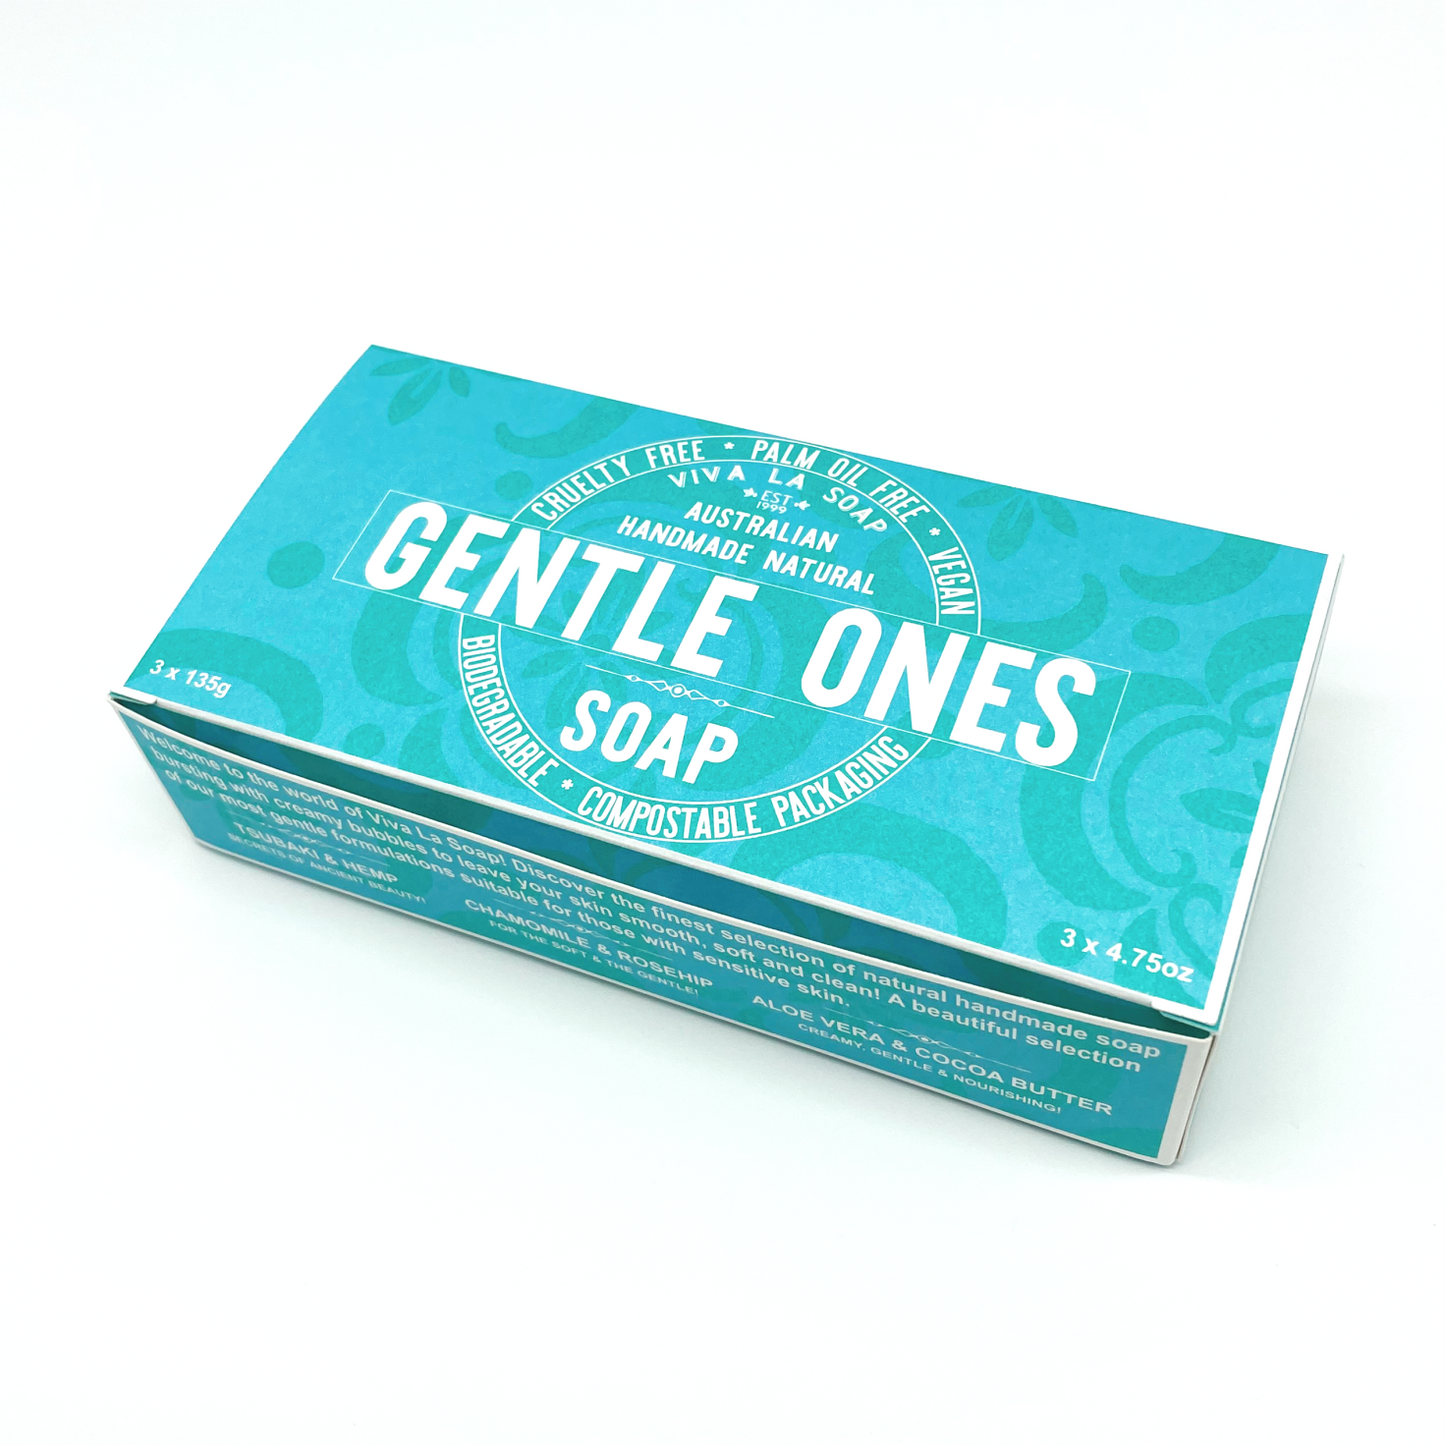 Gentle Ones Natural Soap Gift Box